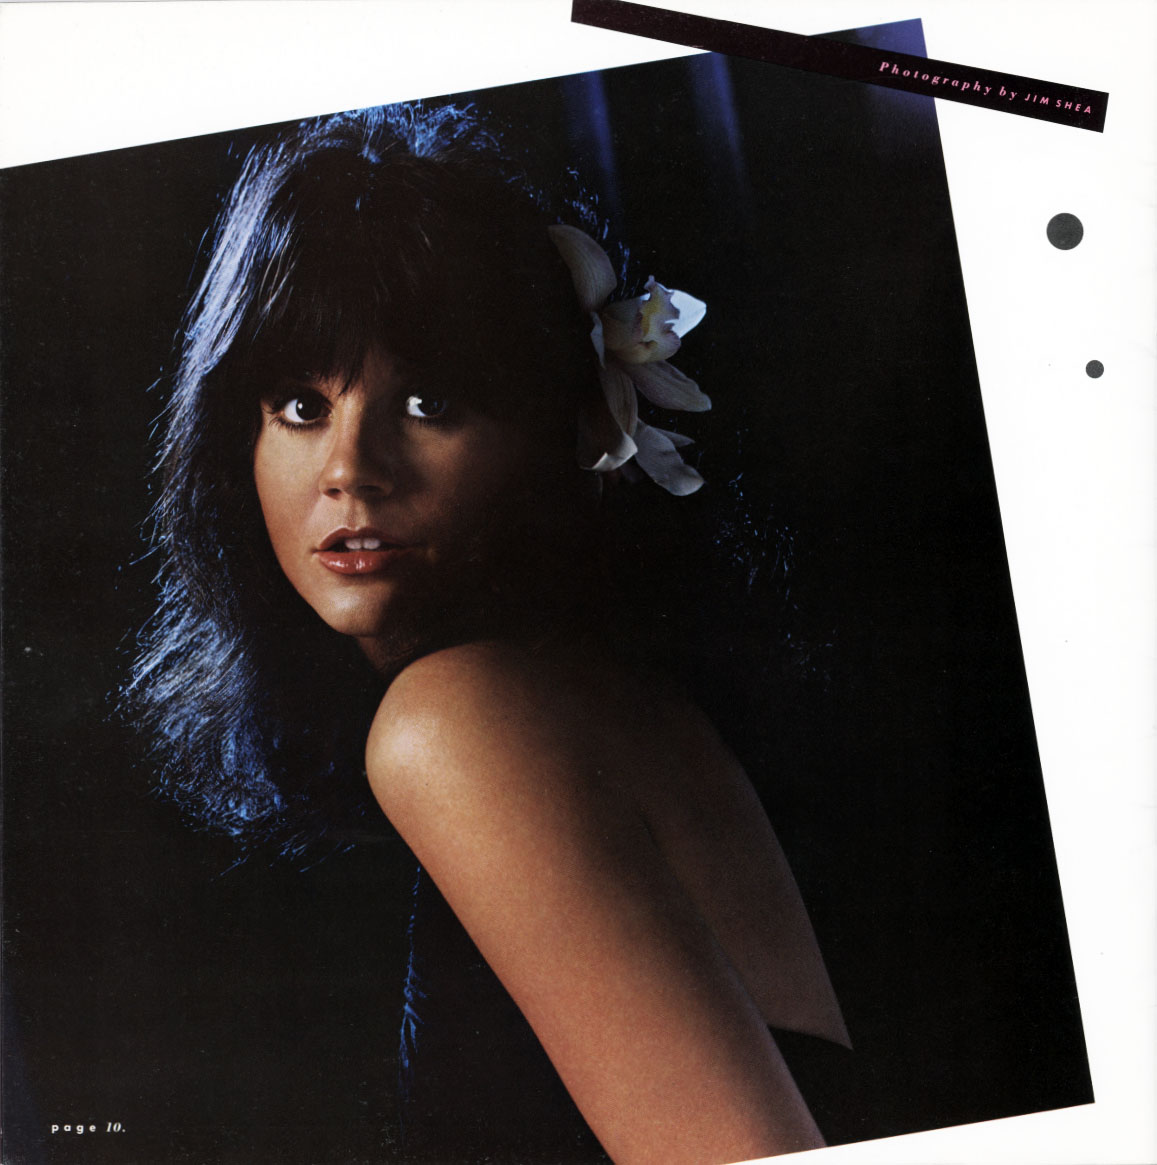 MAD LOVE tour book | Linda Ronstadt Fans Discussion